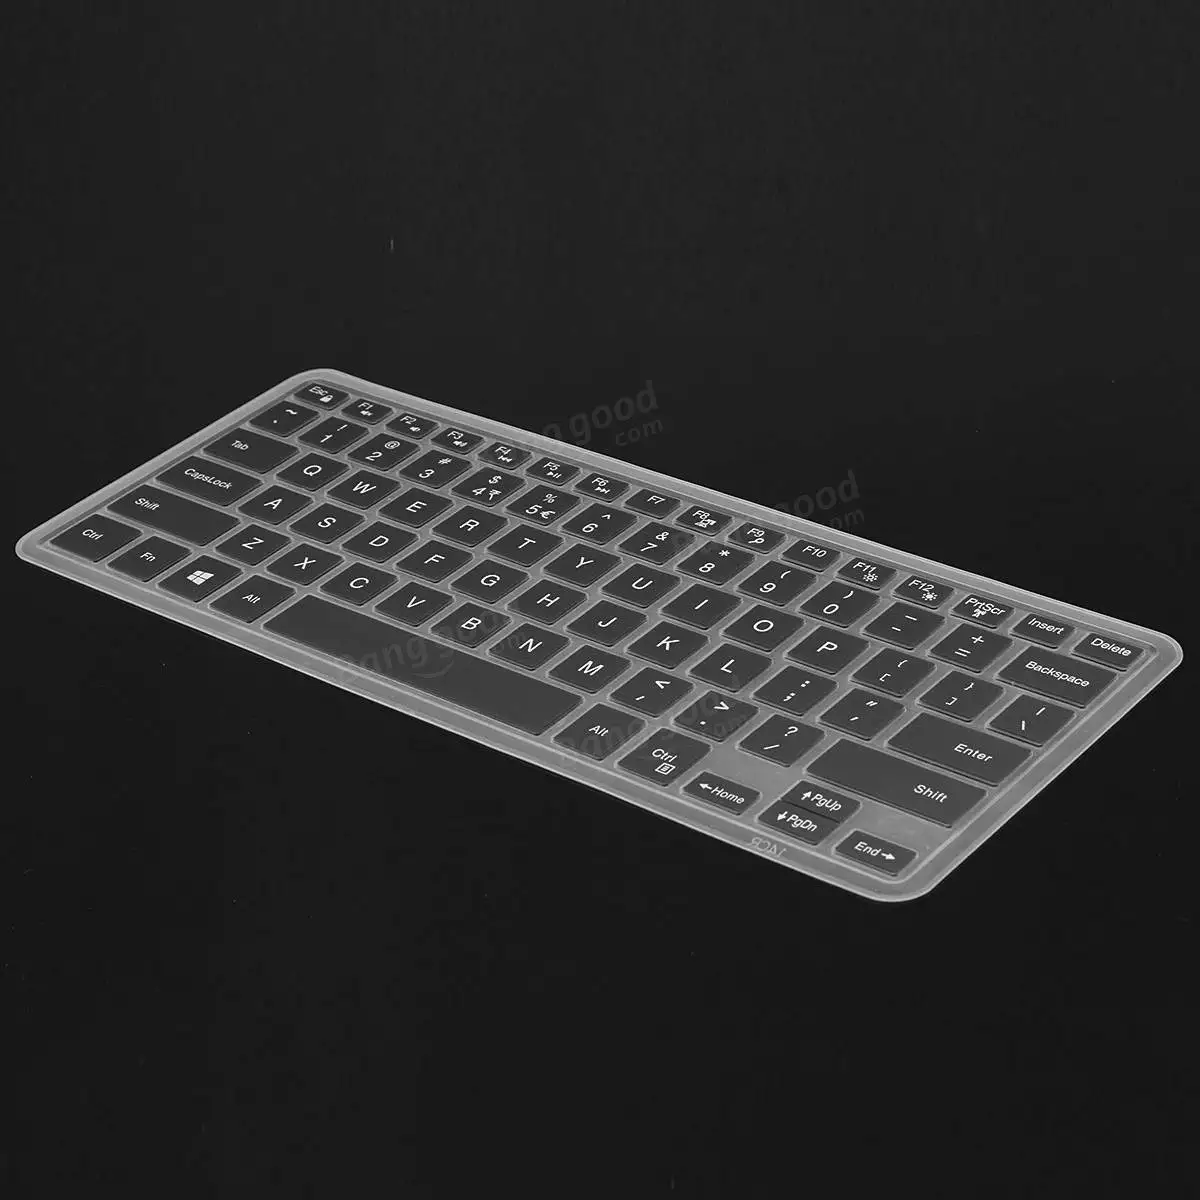 Keyboard Cover Protector For Dell XPS 15 15-9550 / inspiron 14CR 14MR 14SR